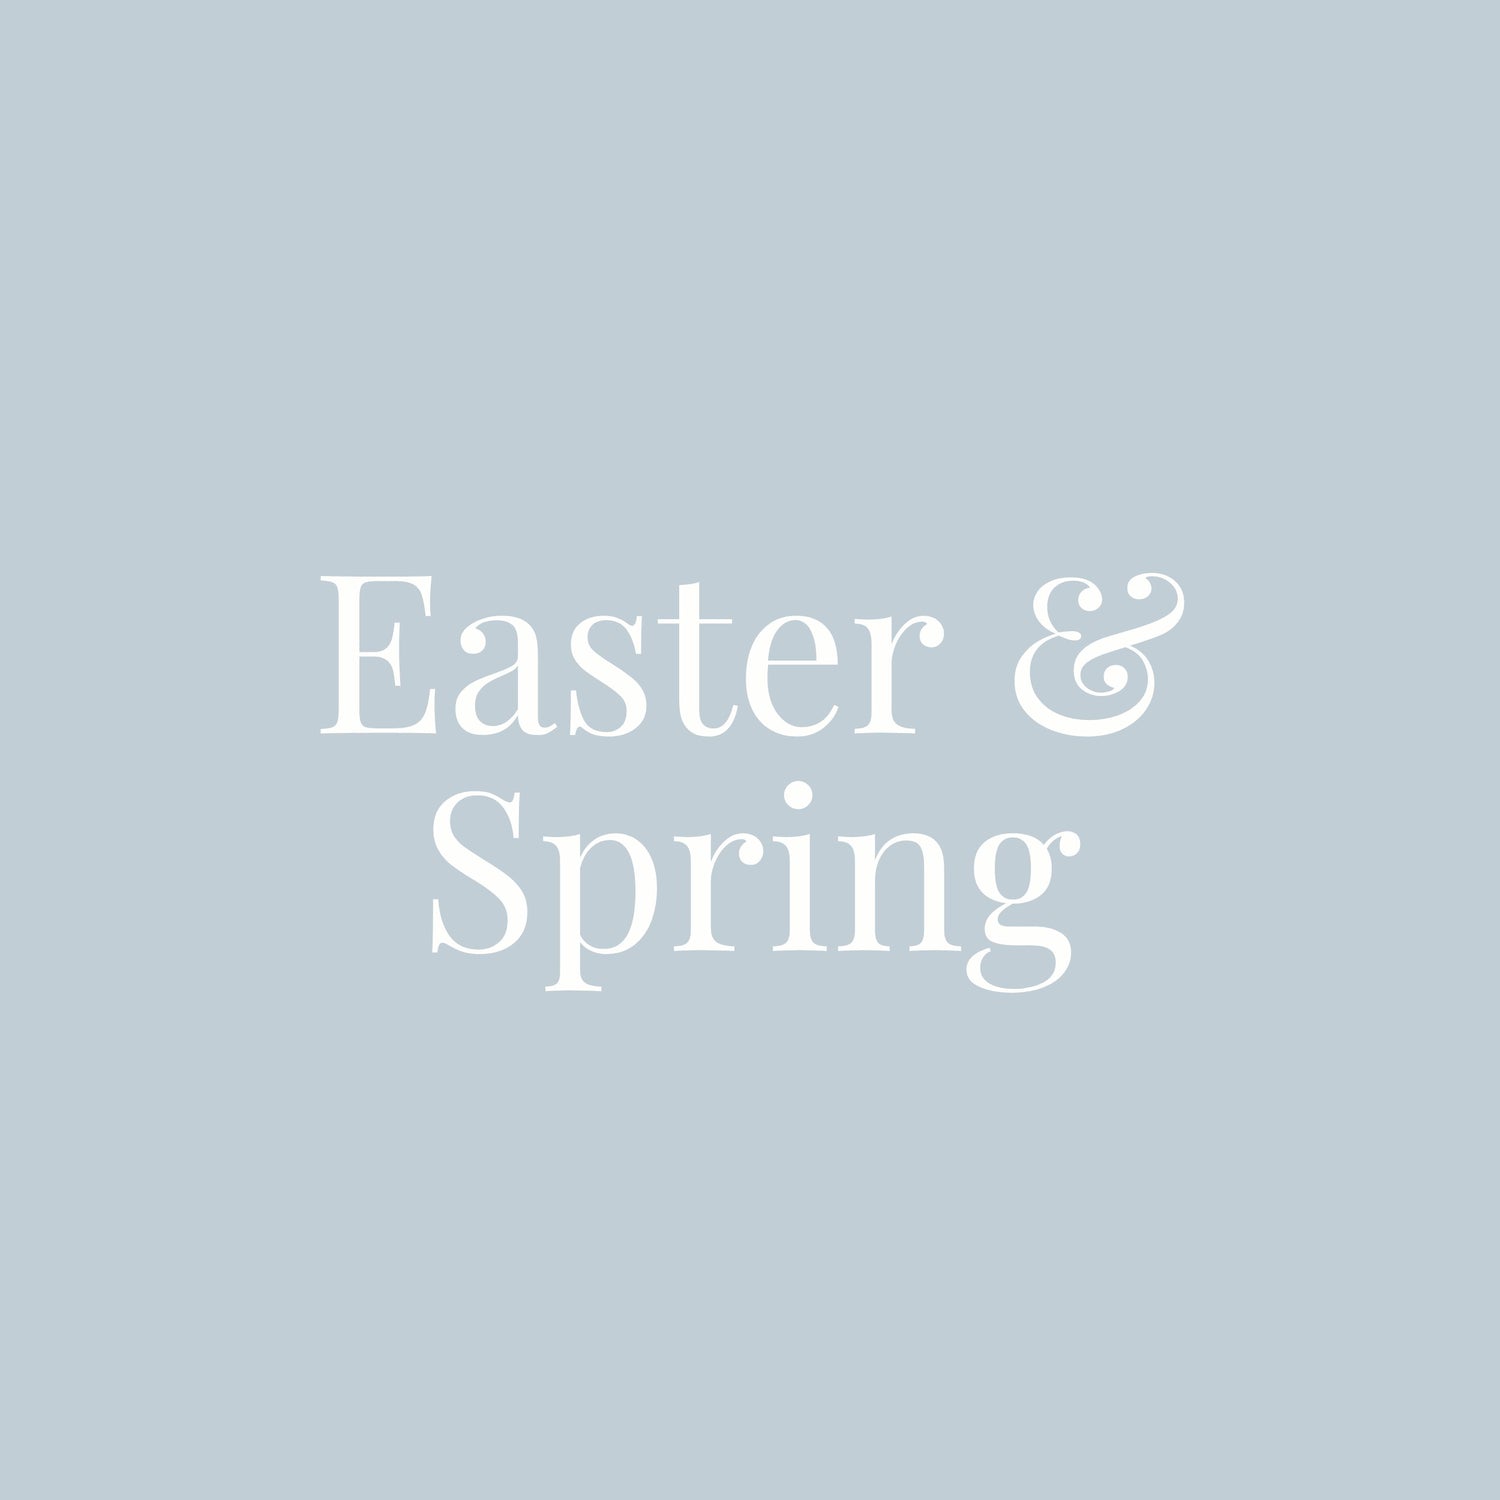 Spring and Easter